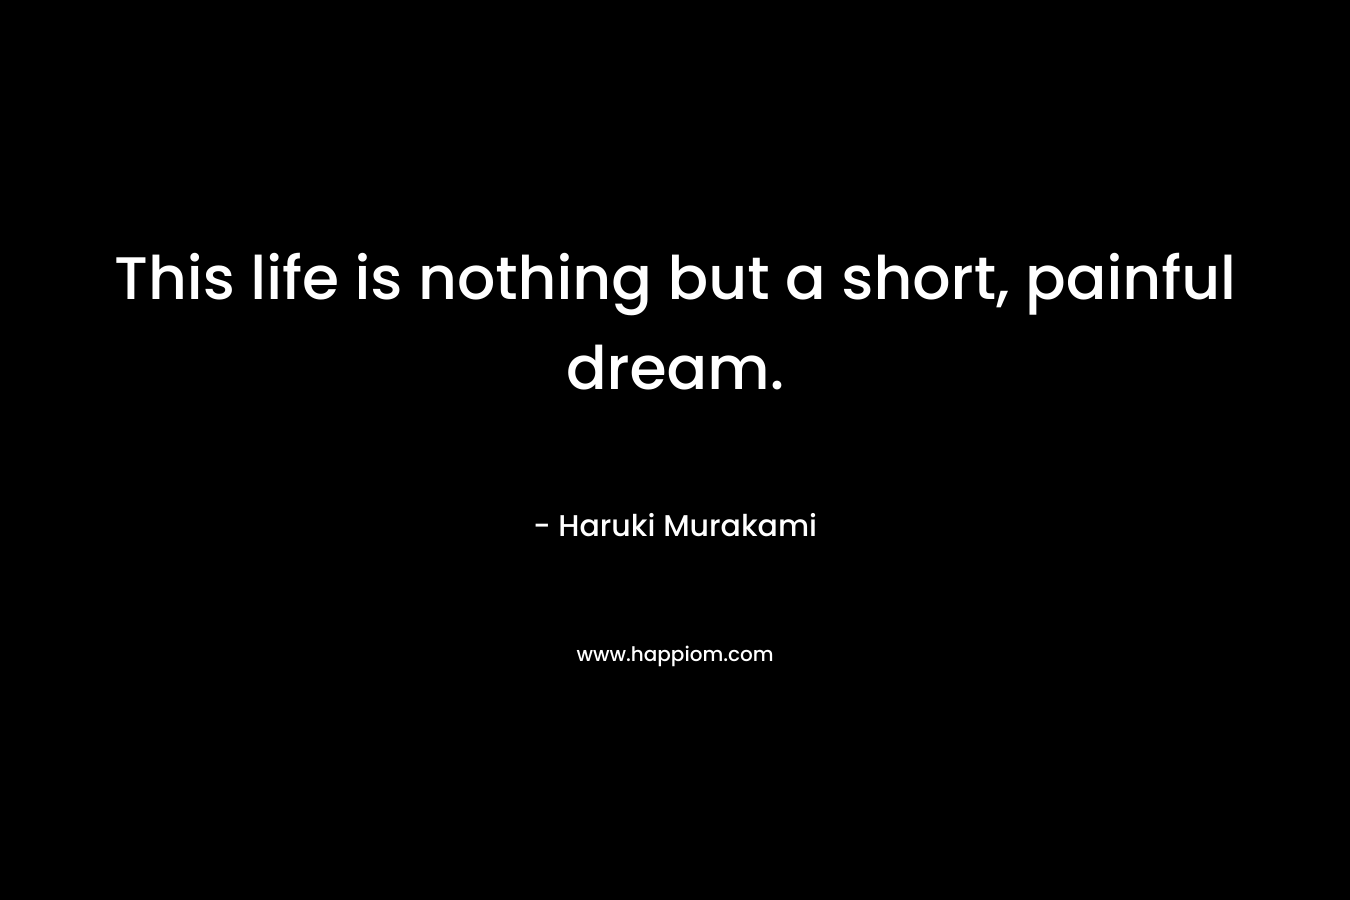 This life is nothing but a short, painful dream.